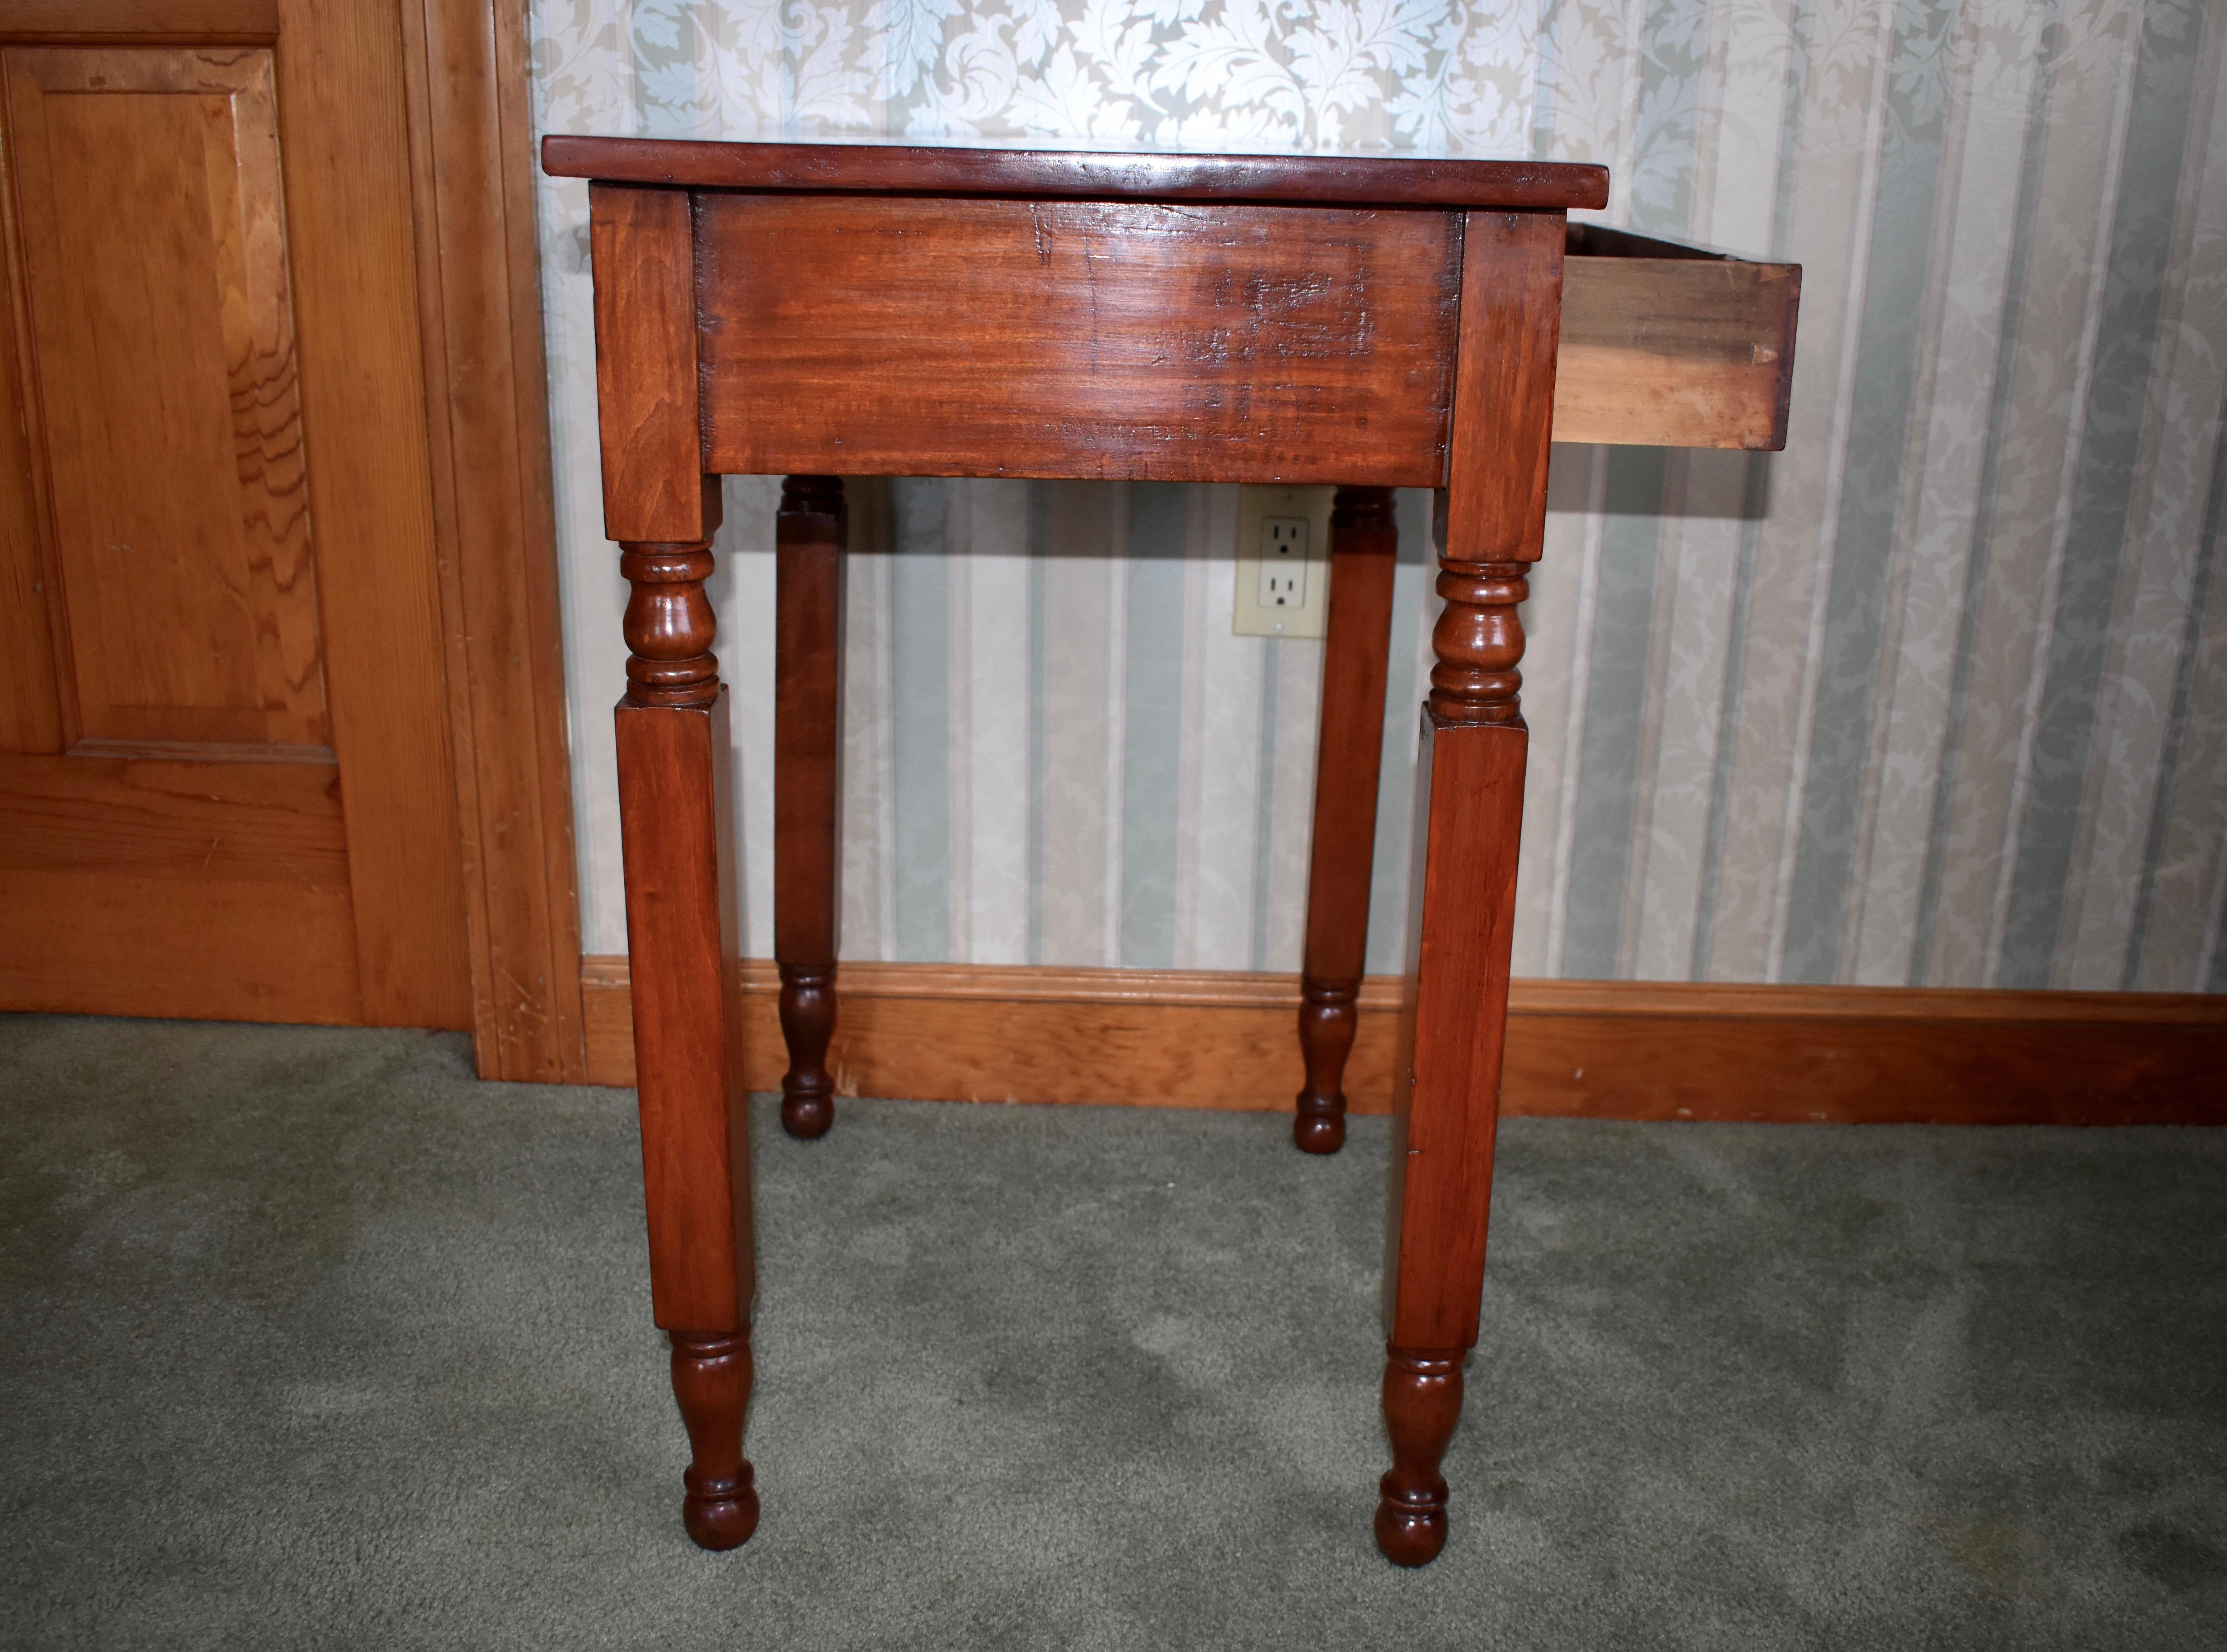 Empire one drawer stand in cherry and pine, circa 1820 Upstate, NY. Very nice condition. Top recently refinished to match. Knob original to piece. Measures: 28.5